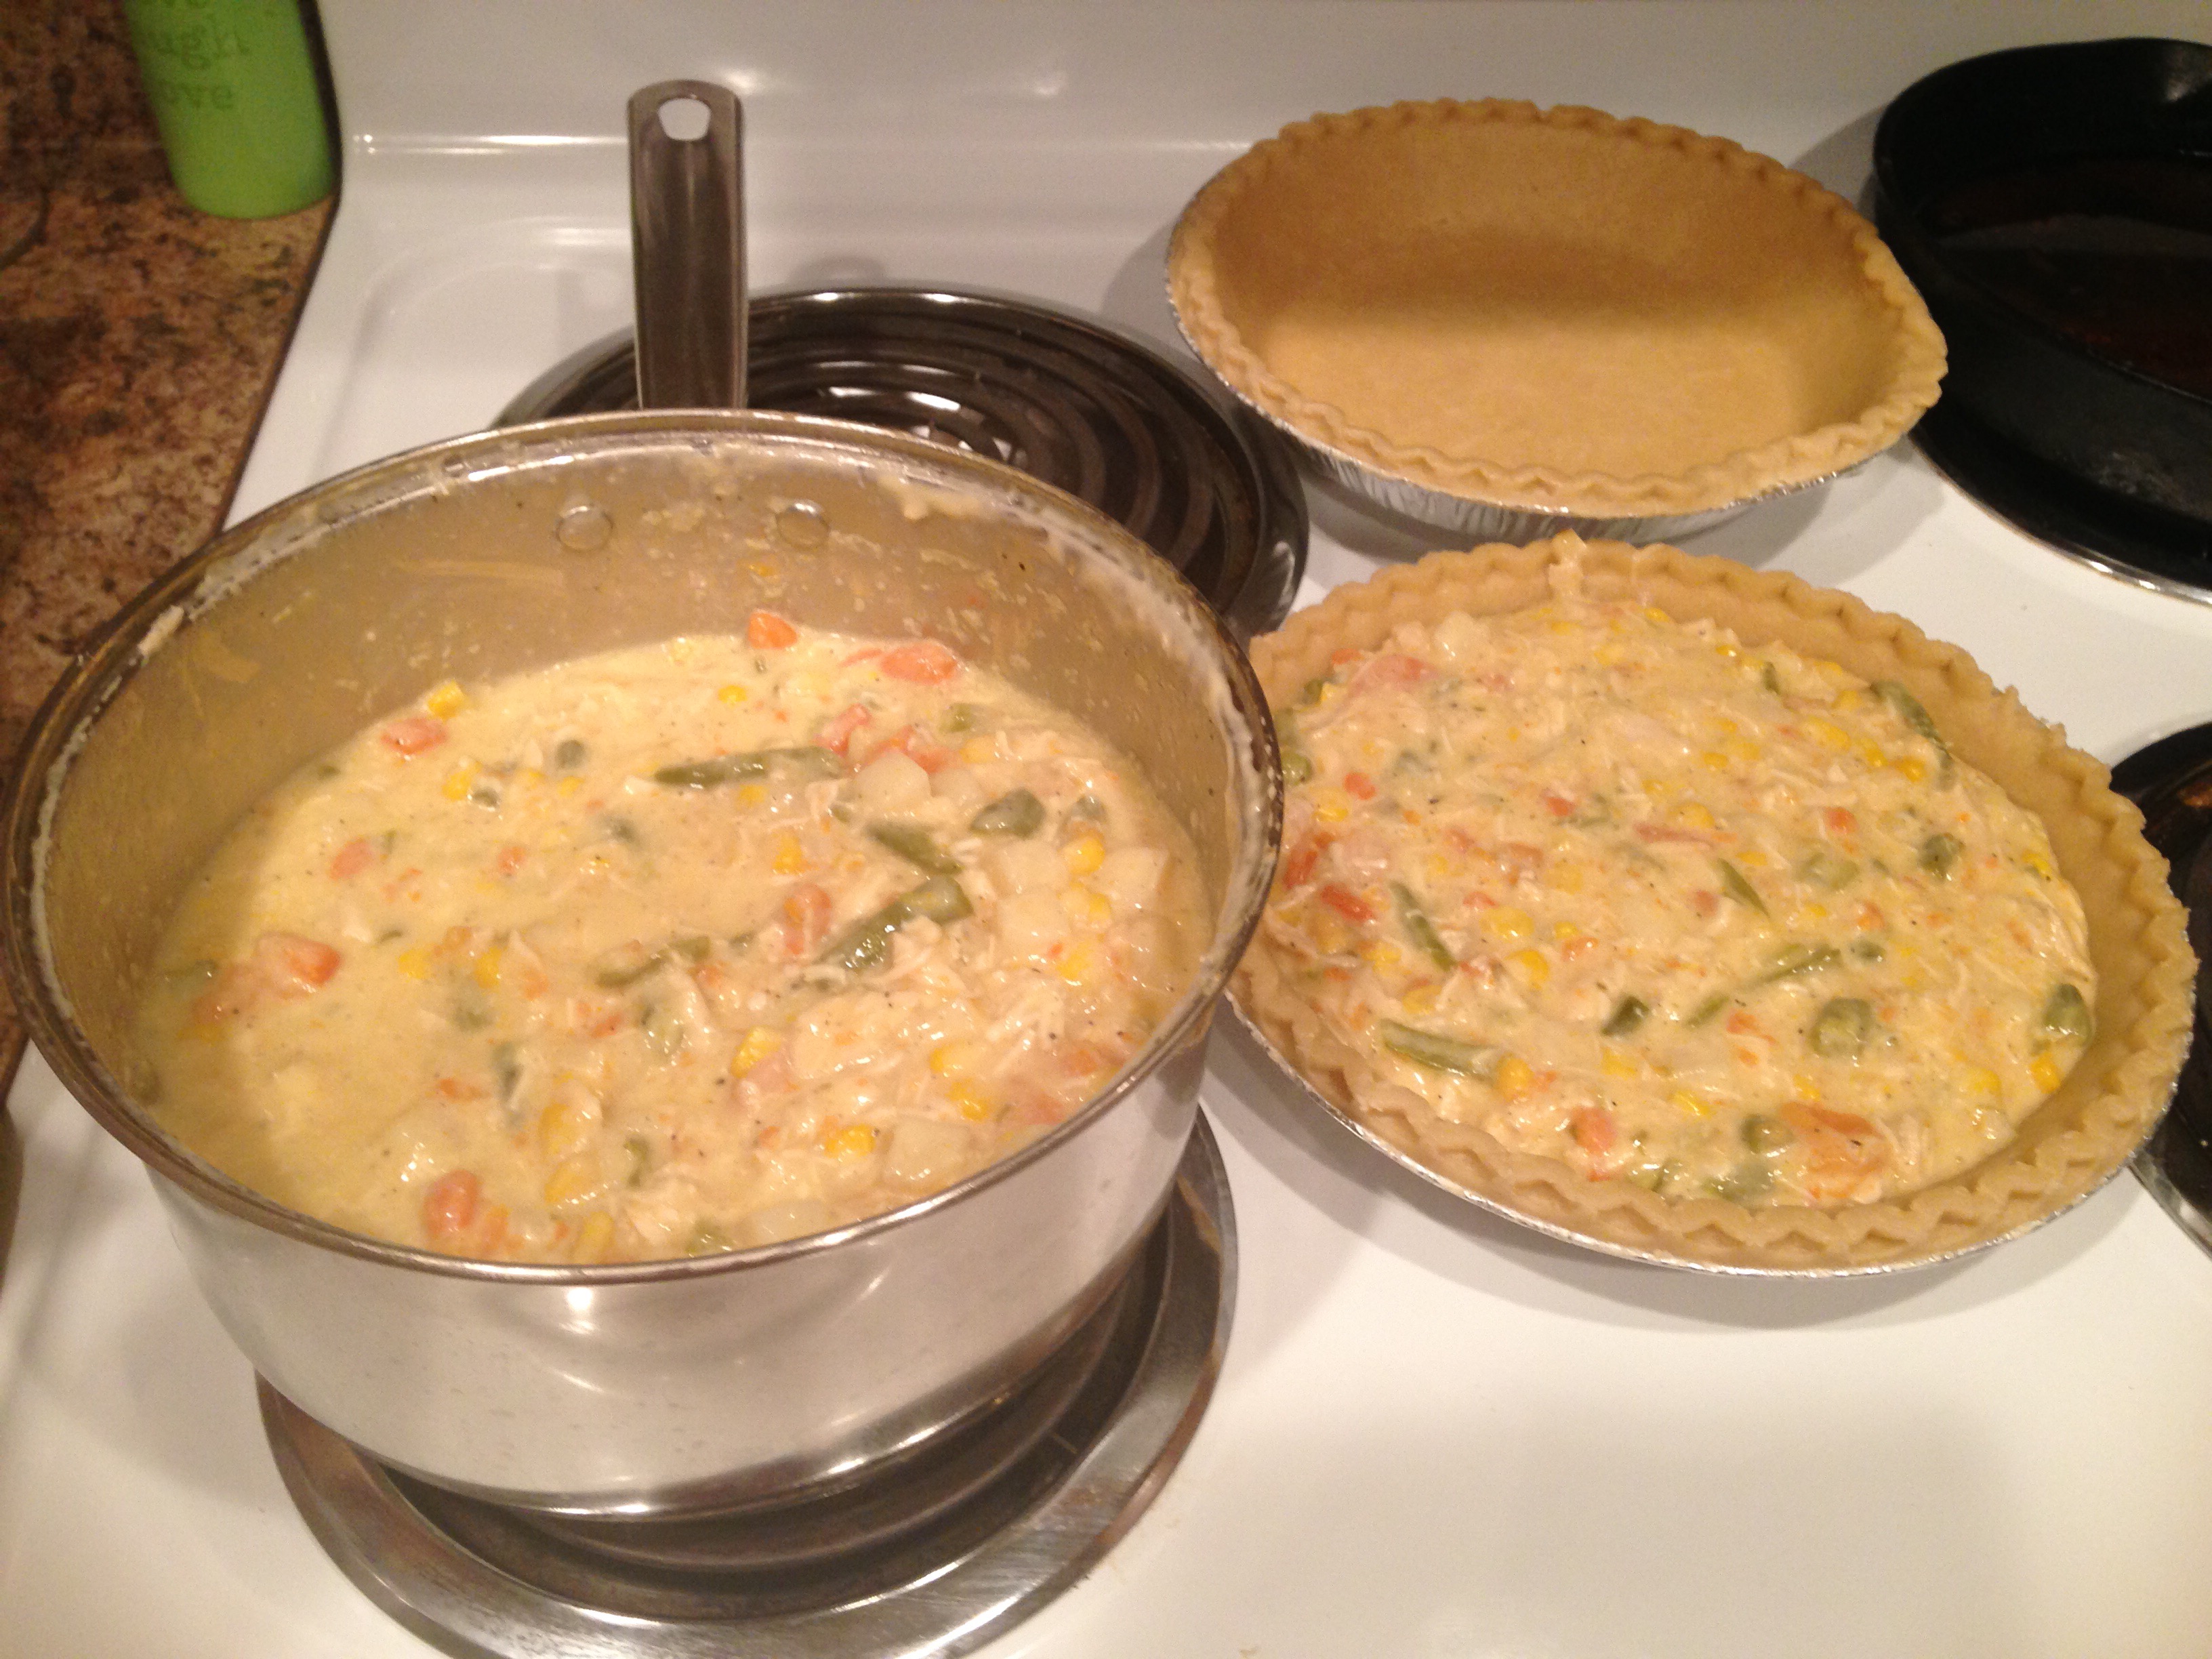 These chicken pot pies are filled with a hearty mixture of chicken and vegetables. This filling is perfectly seasoned and creamy with the help of cream of chicken.